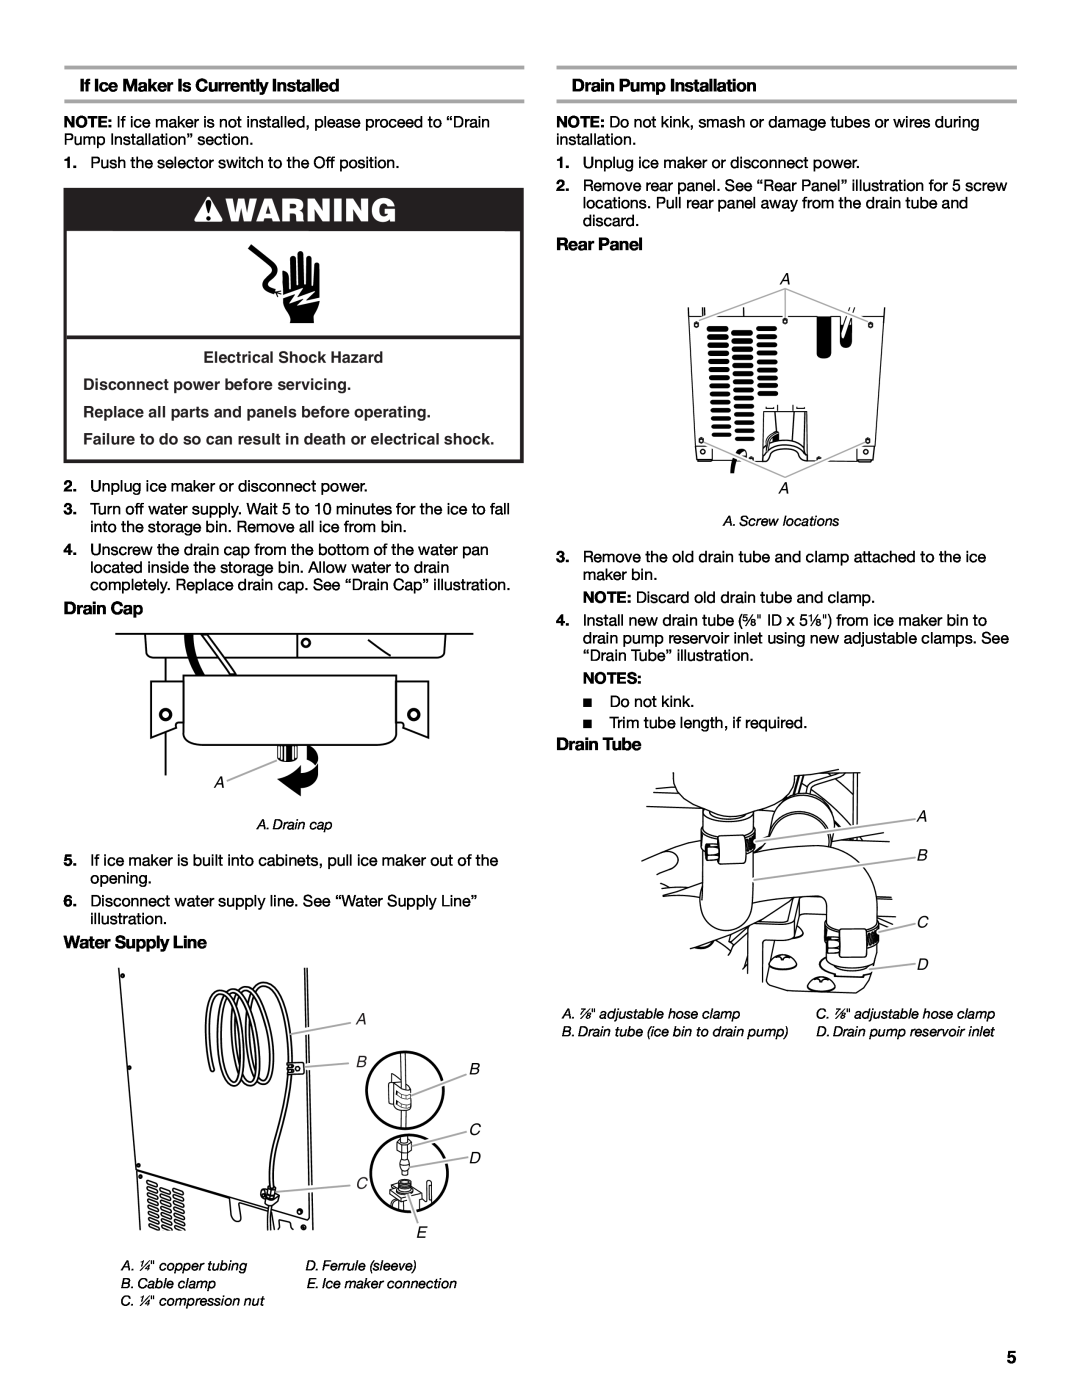 Whirlpool W10541636A If Ice Maker Is Currently Installed, Drain Cap, Water Supply Line, Drain Pump Installation 